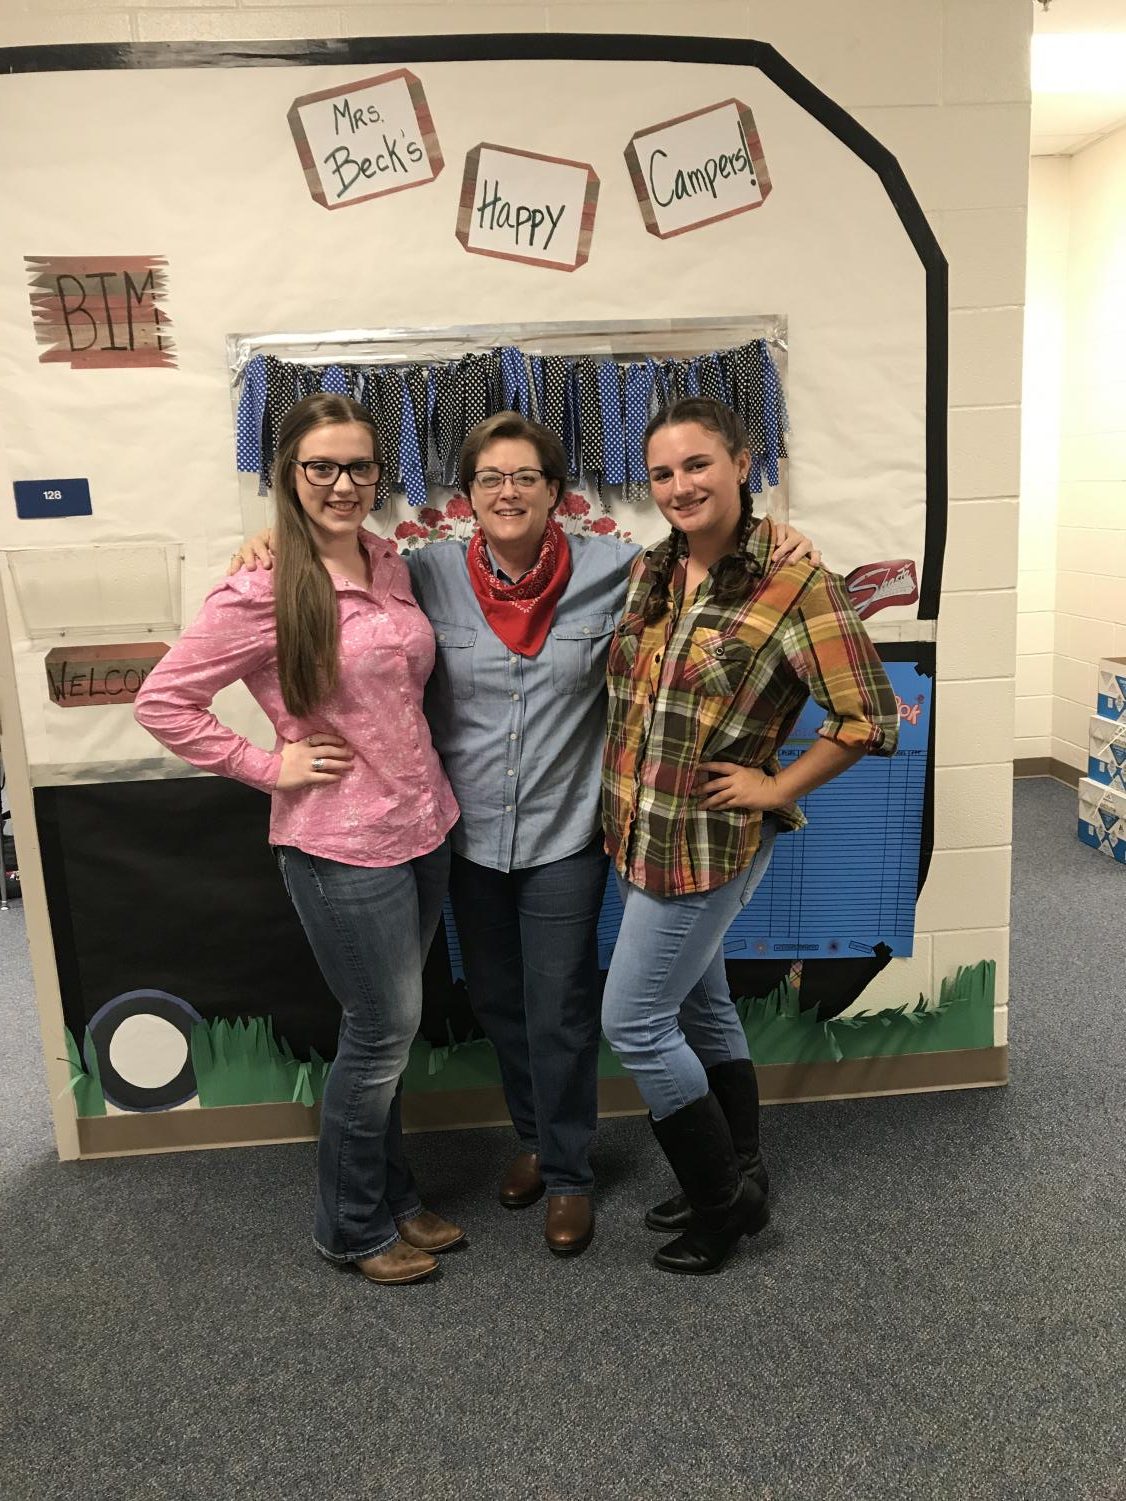 Teacher Lynda Beck celebrates western day with students Alanna Kologey and Keslie Cook. Beck has participated in numerous spirit days during her years at LHS.